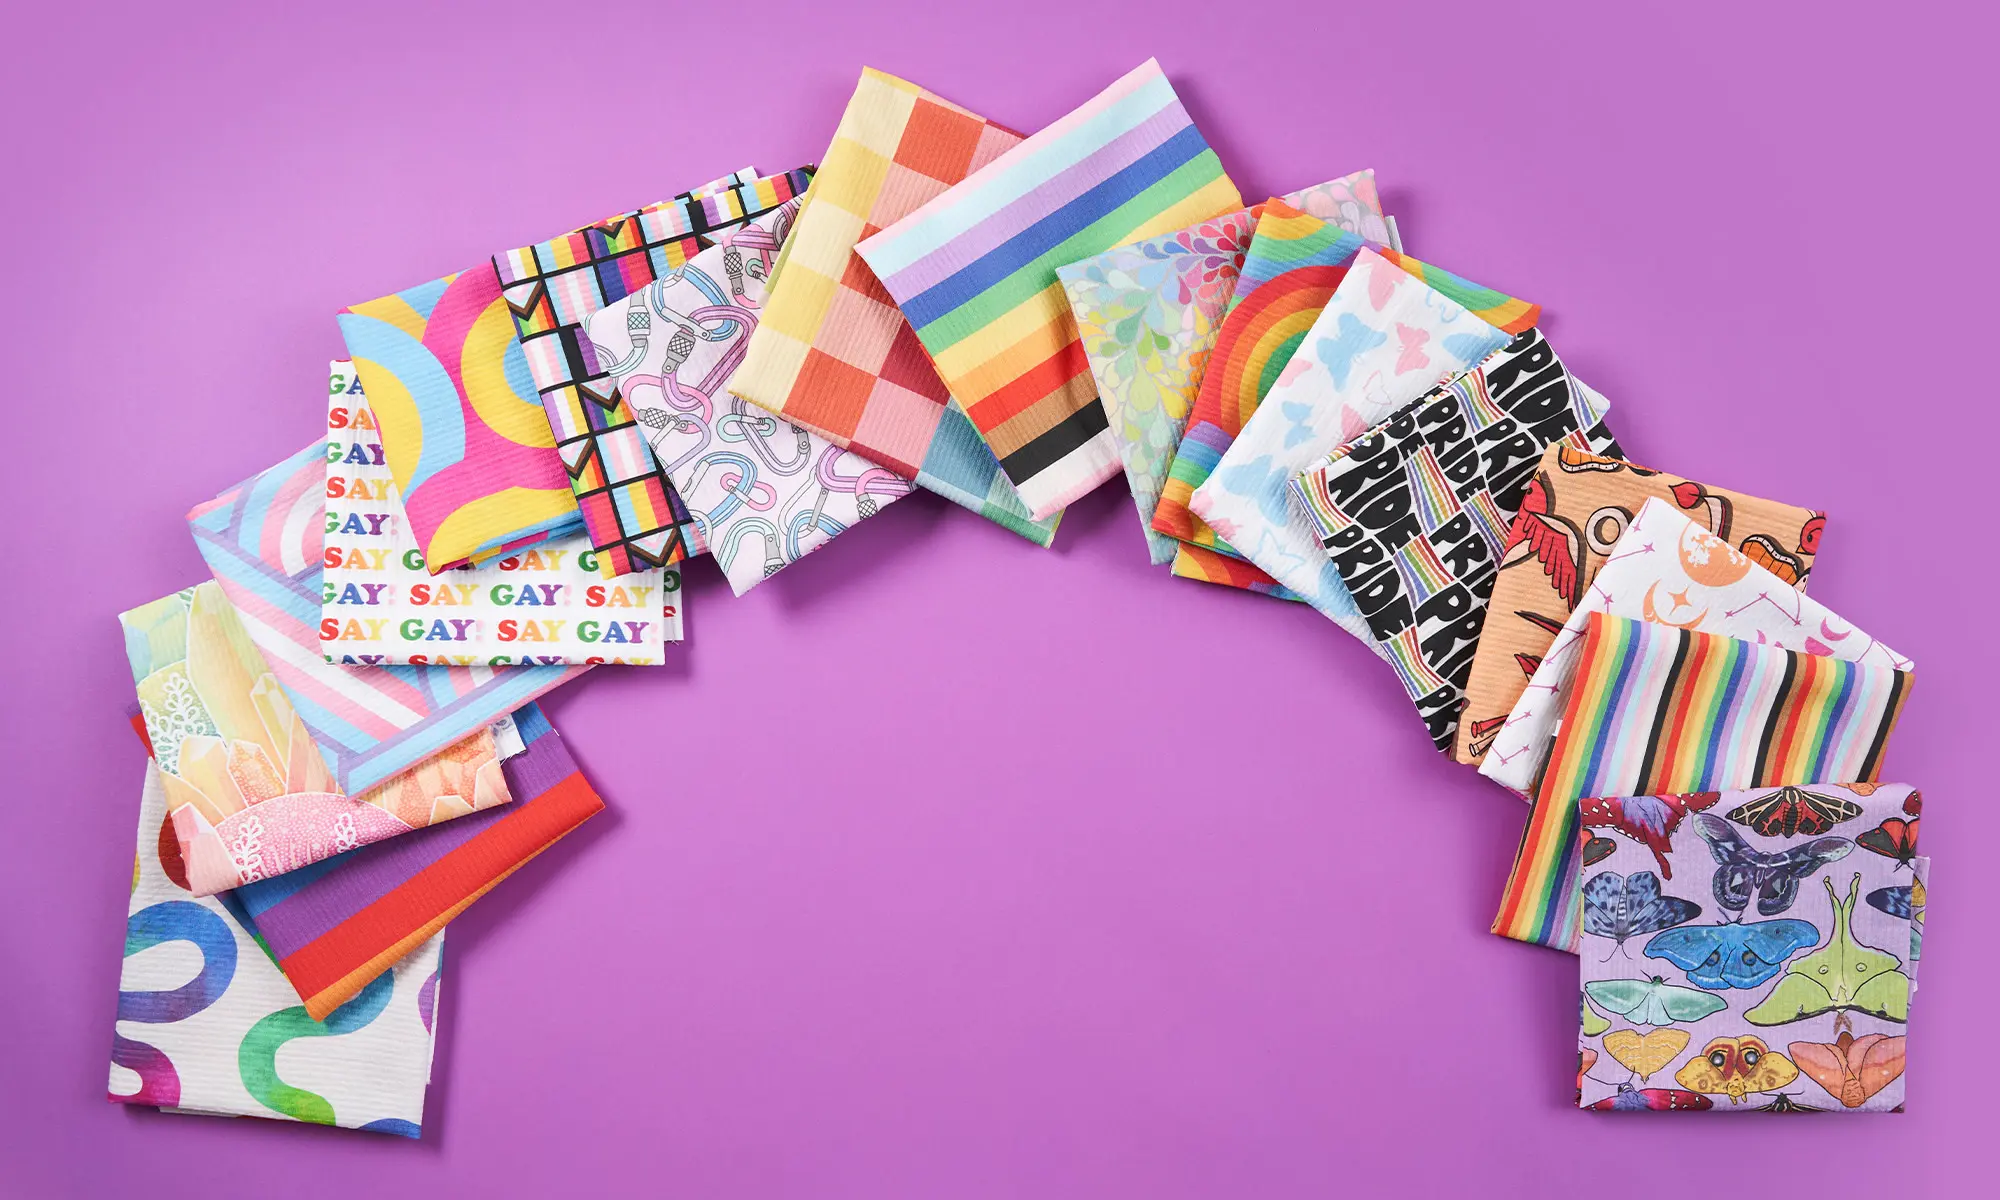 Pride themed designs printed on seersucker fabric arranged in an arch like a rainbow.